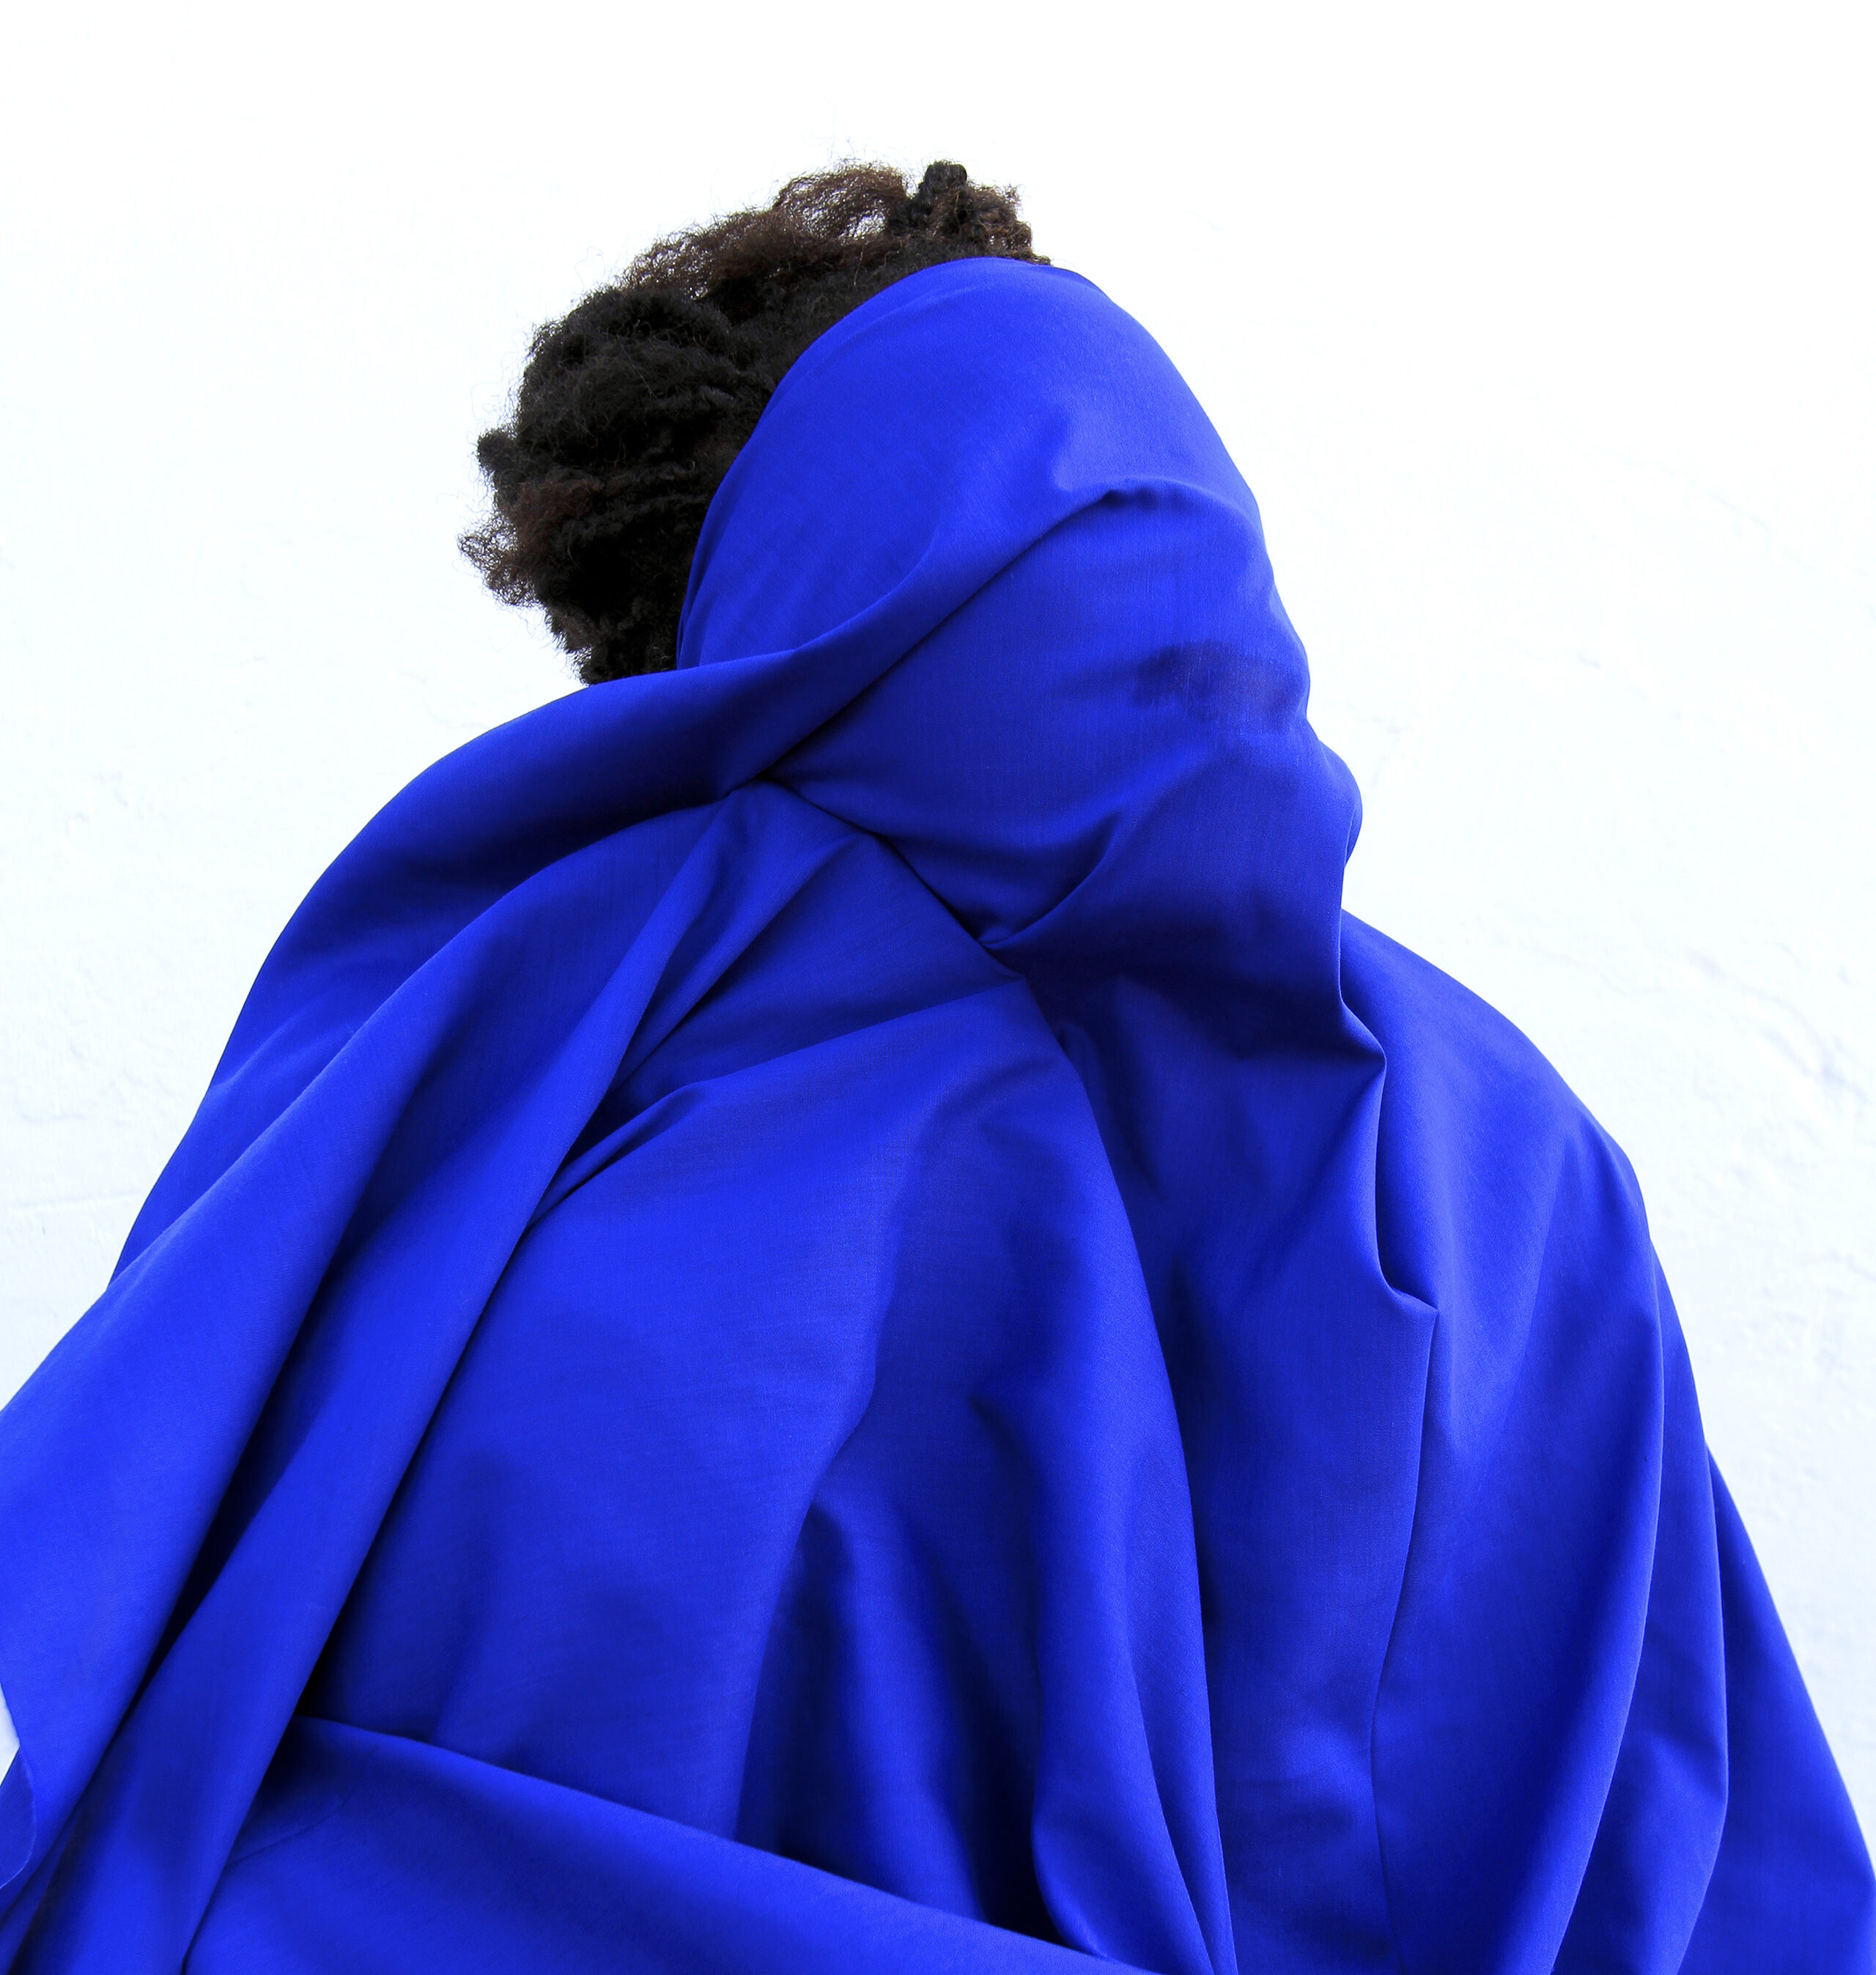 A figure with short dark hair stands in front of a stark white background with voluminous, vibrant blue fabric draped over their face and body.